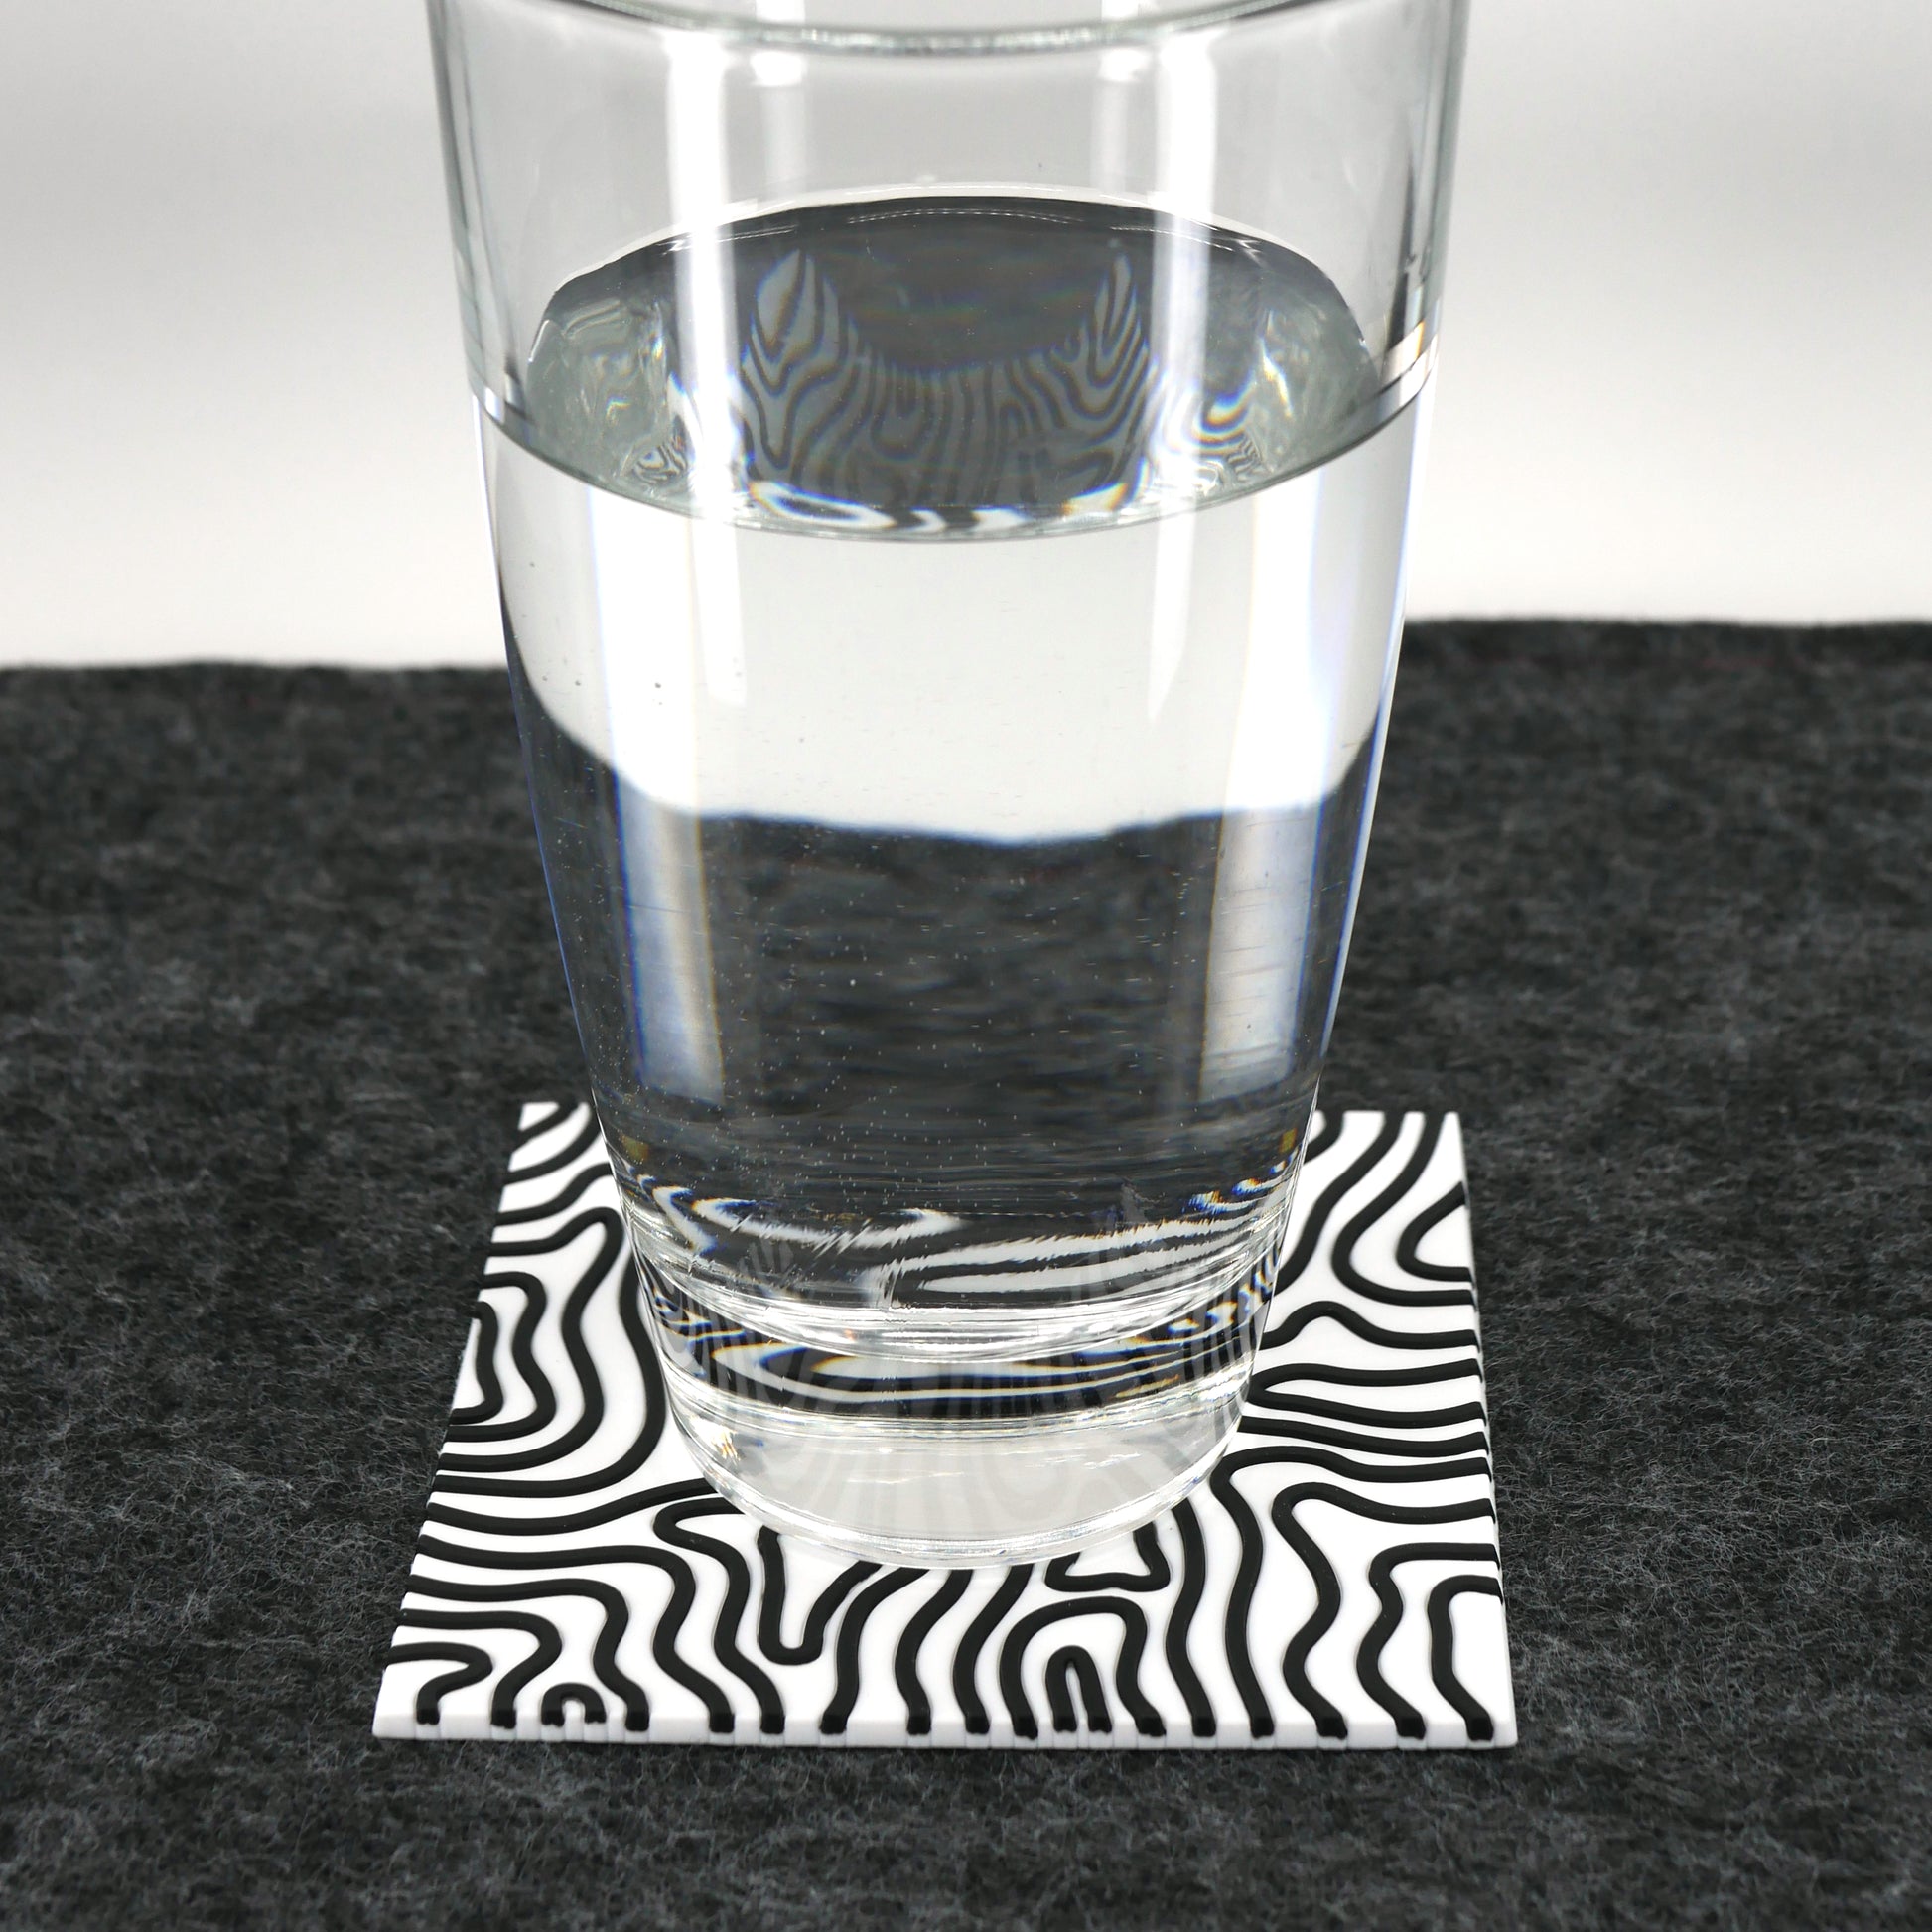 A square white topographic PVC rubber coaster sitting on a gray desk mat. A glass of water sits on the coaster.